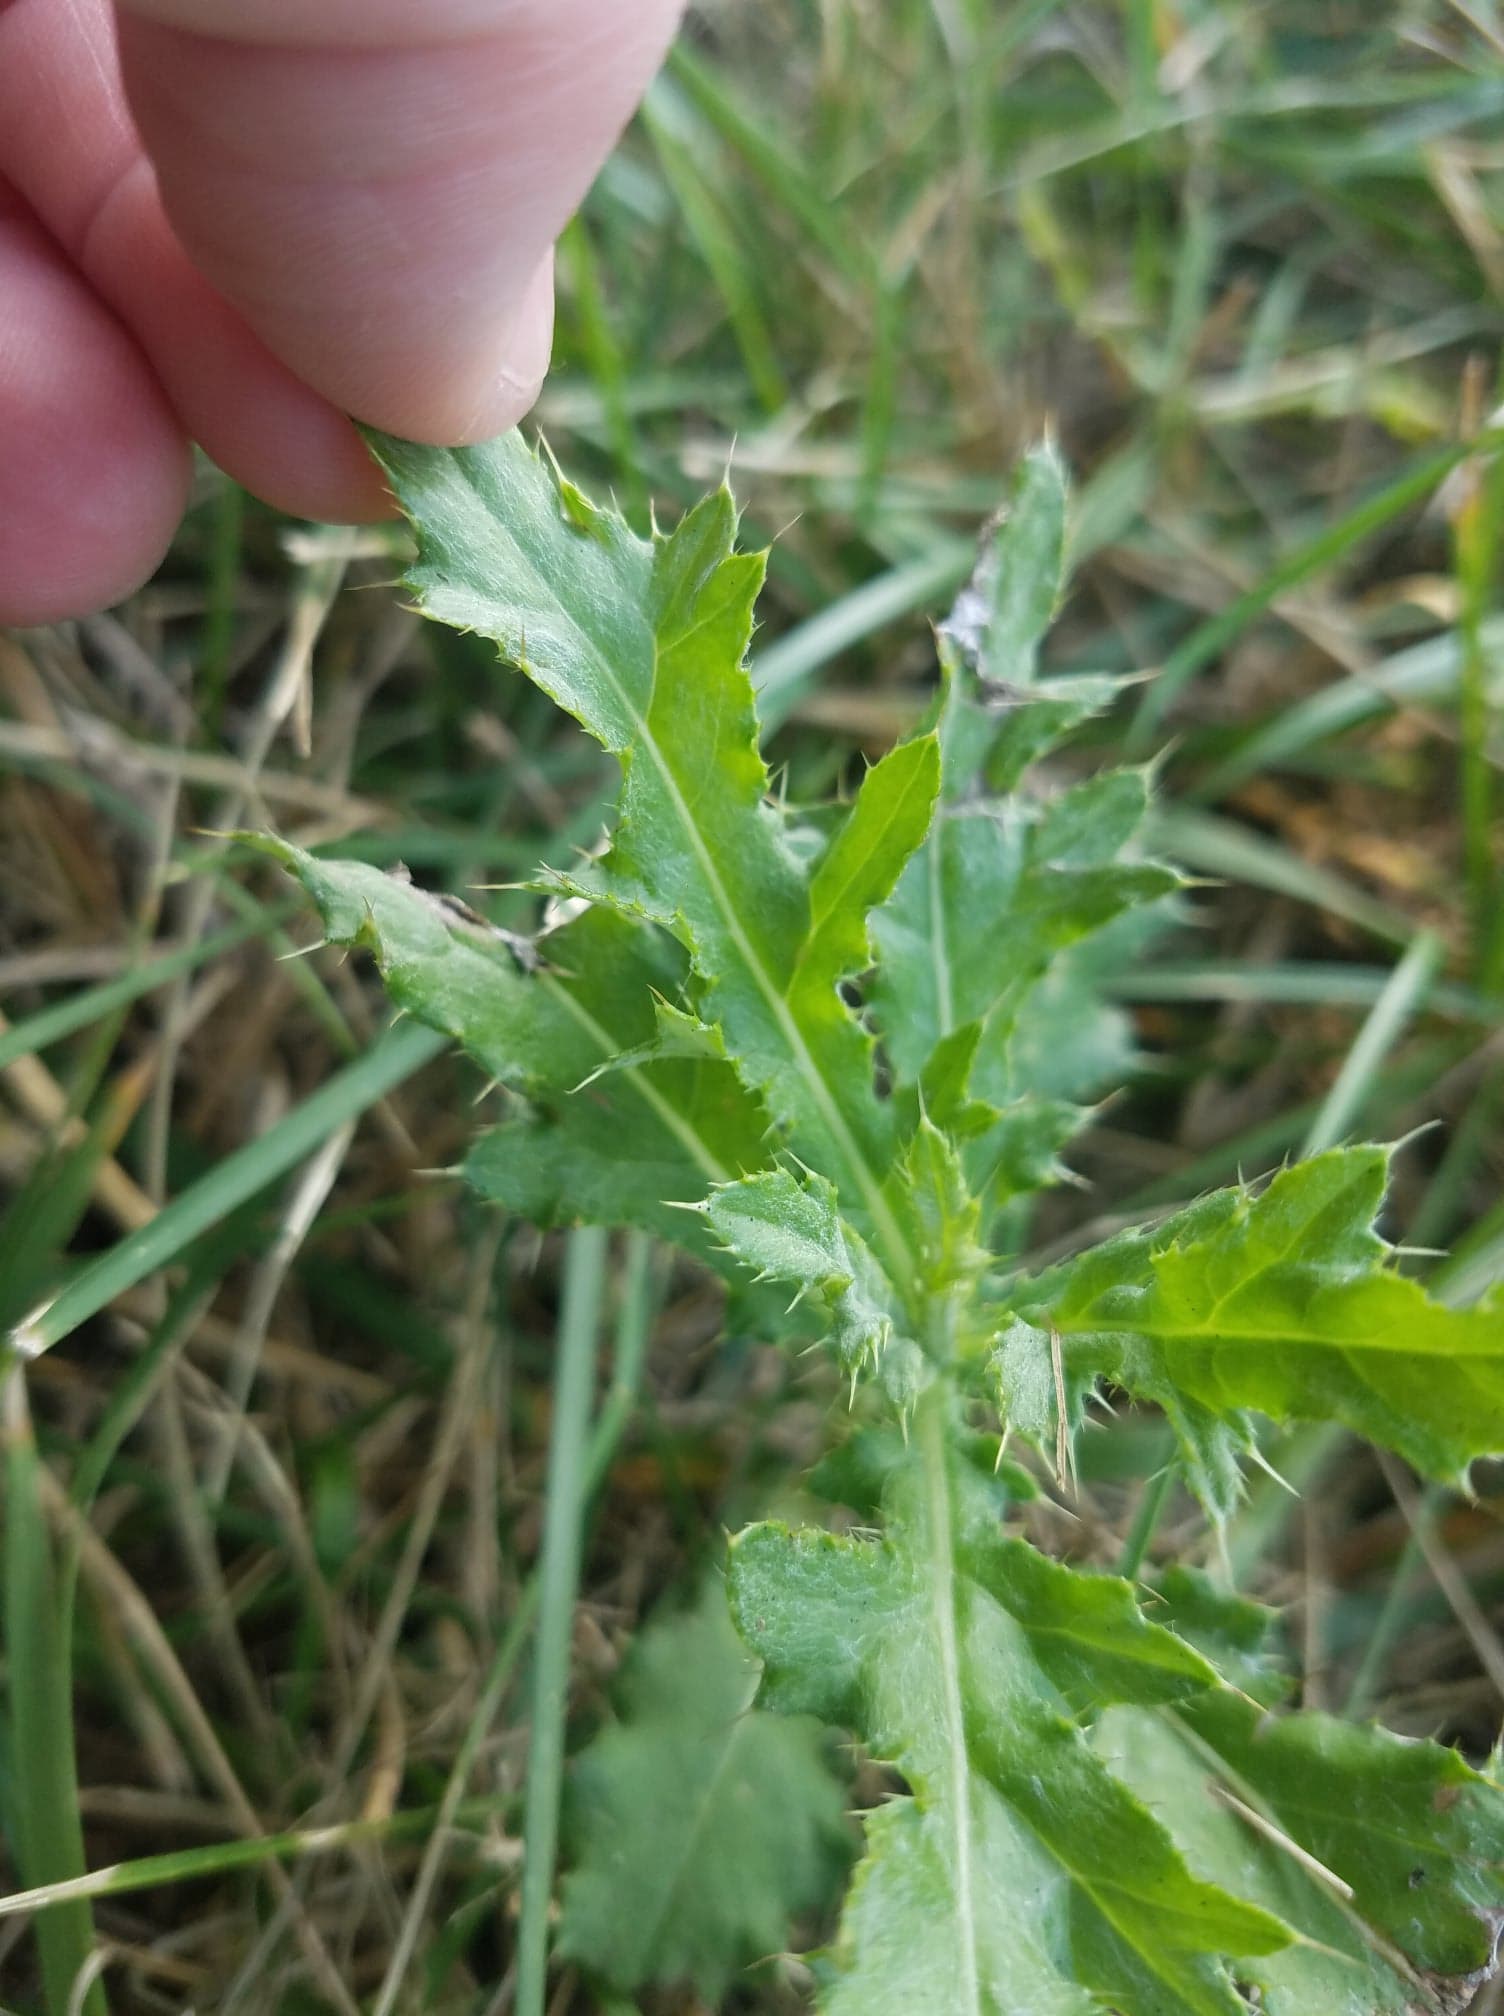 A small trace of Canada thistle spines found in alfalfa hay led to refusal of ewes consuming the hay. (Photo credit: Brooke Stefancik, Purdue University Sullivan County Extension Educator, Agriculture & Natural Resources)